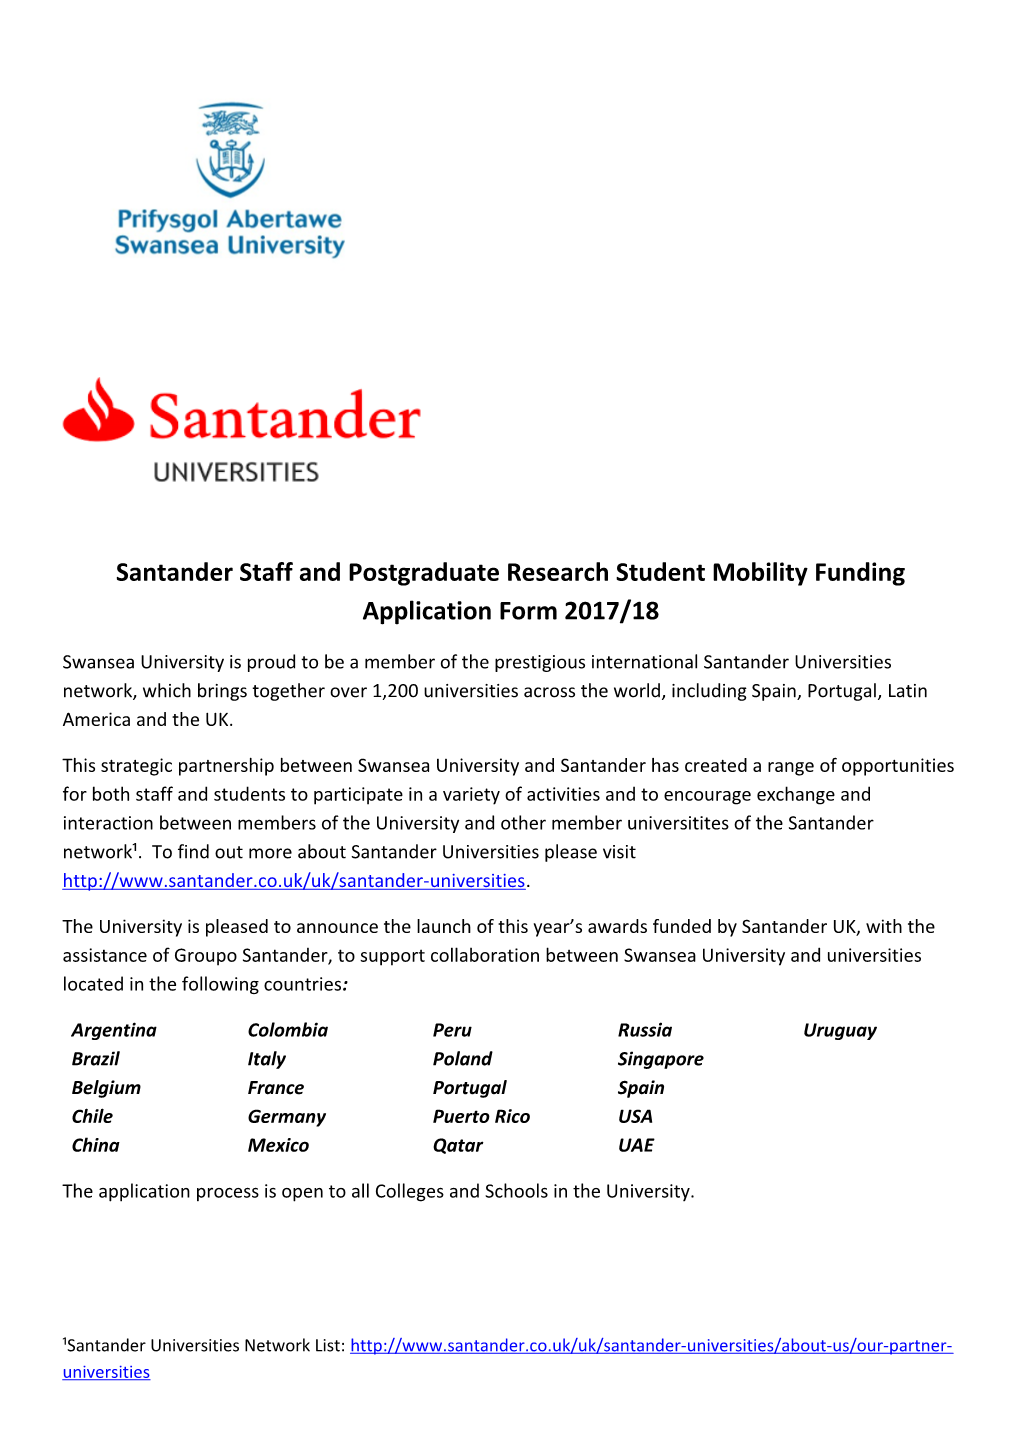 Santander Staff and Postgraduate Research Student Mobility Funding Application Form 2017/18